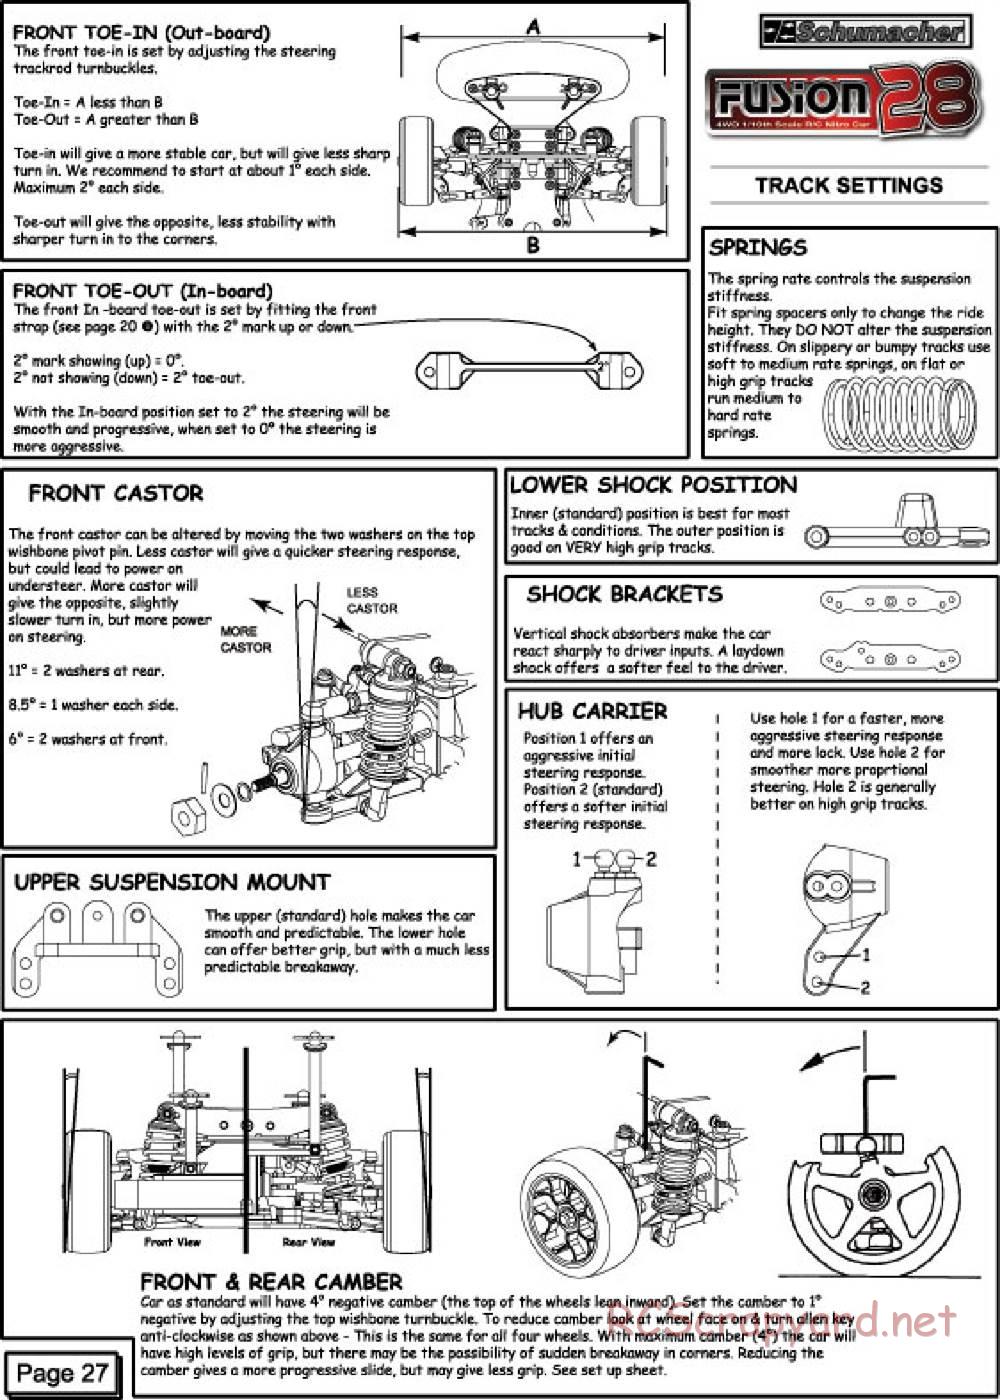 Schumacher - Fusion 28 - Manual - Page 30